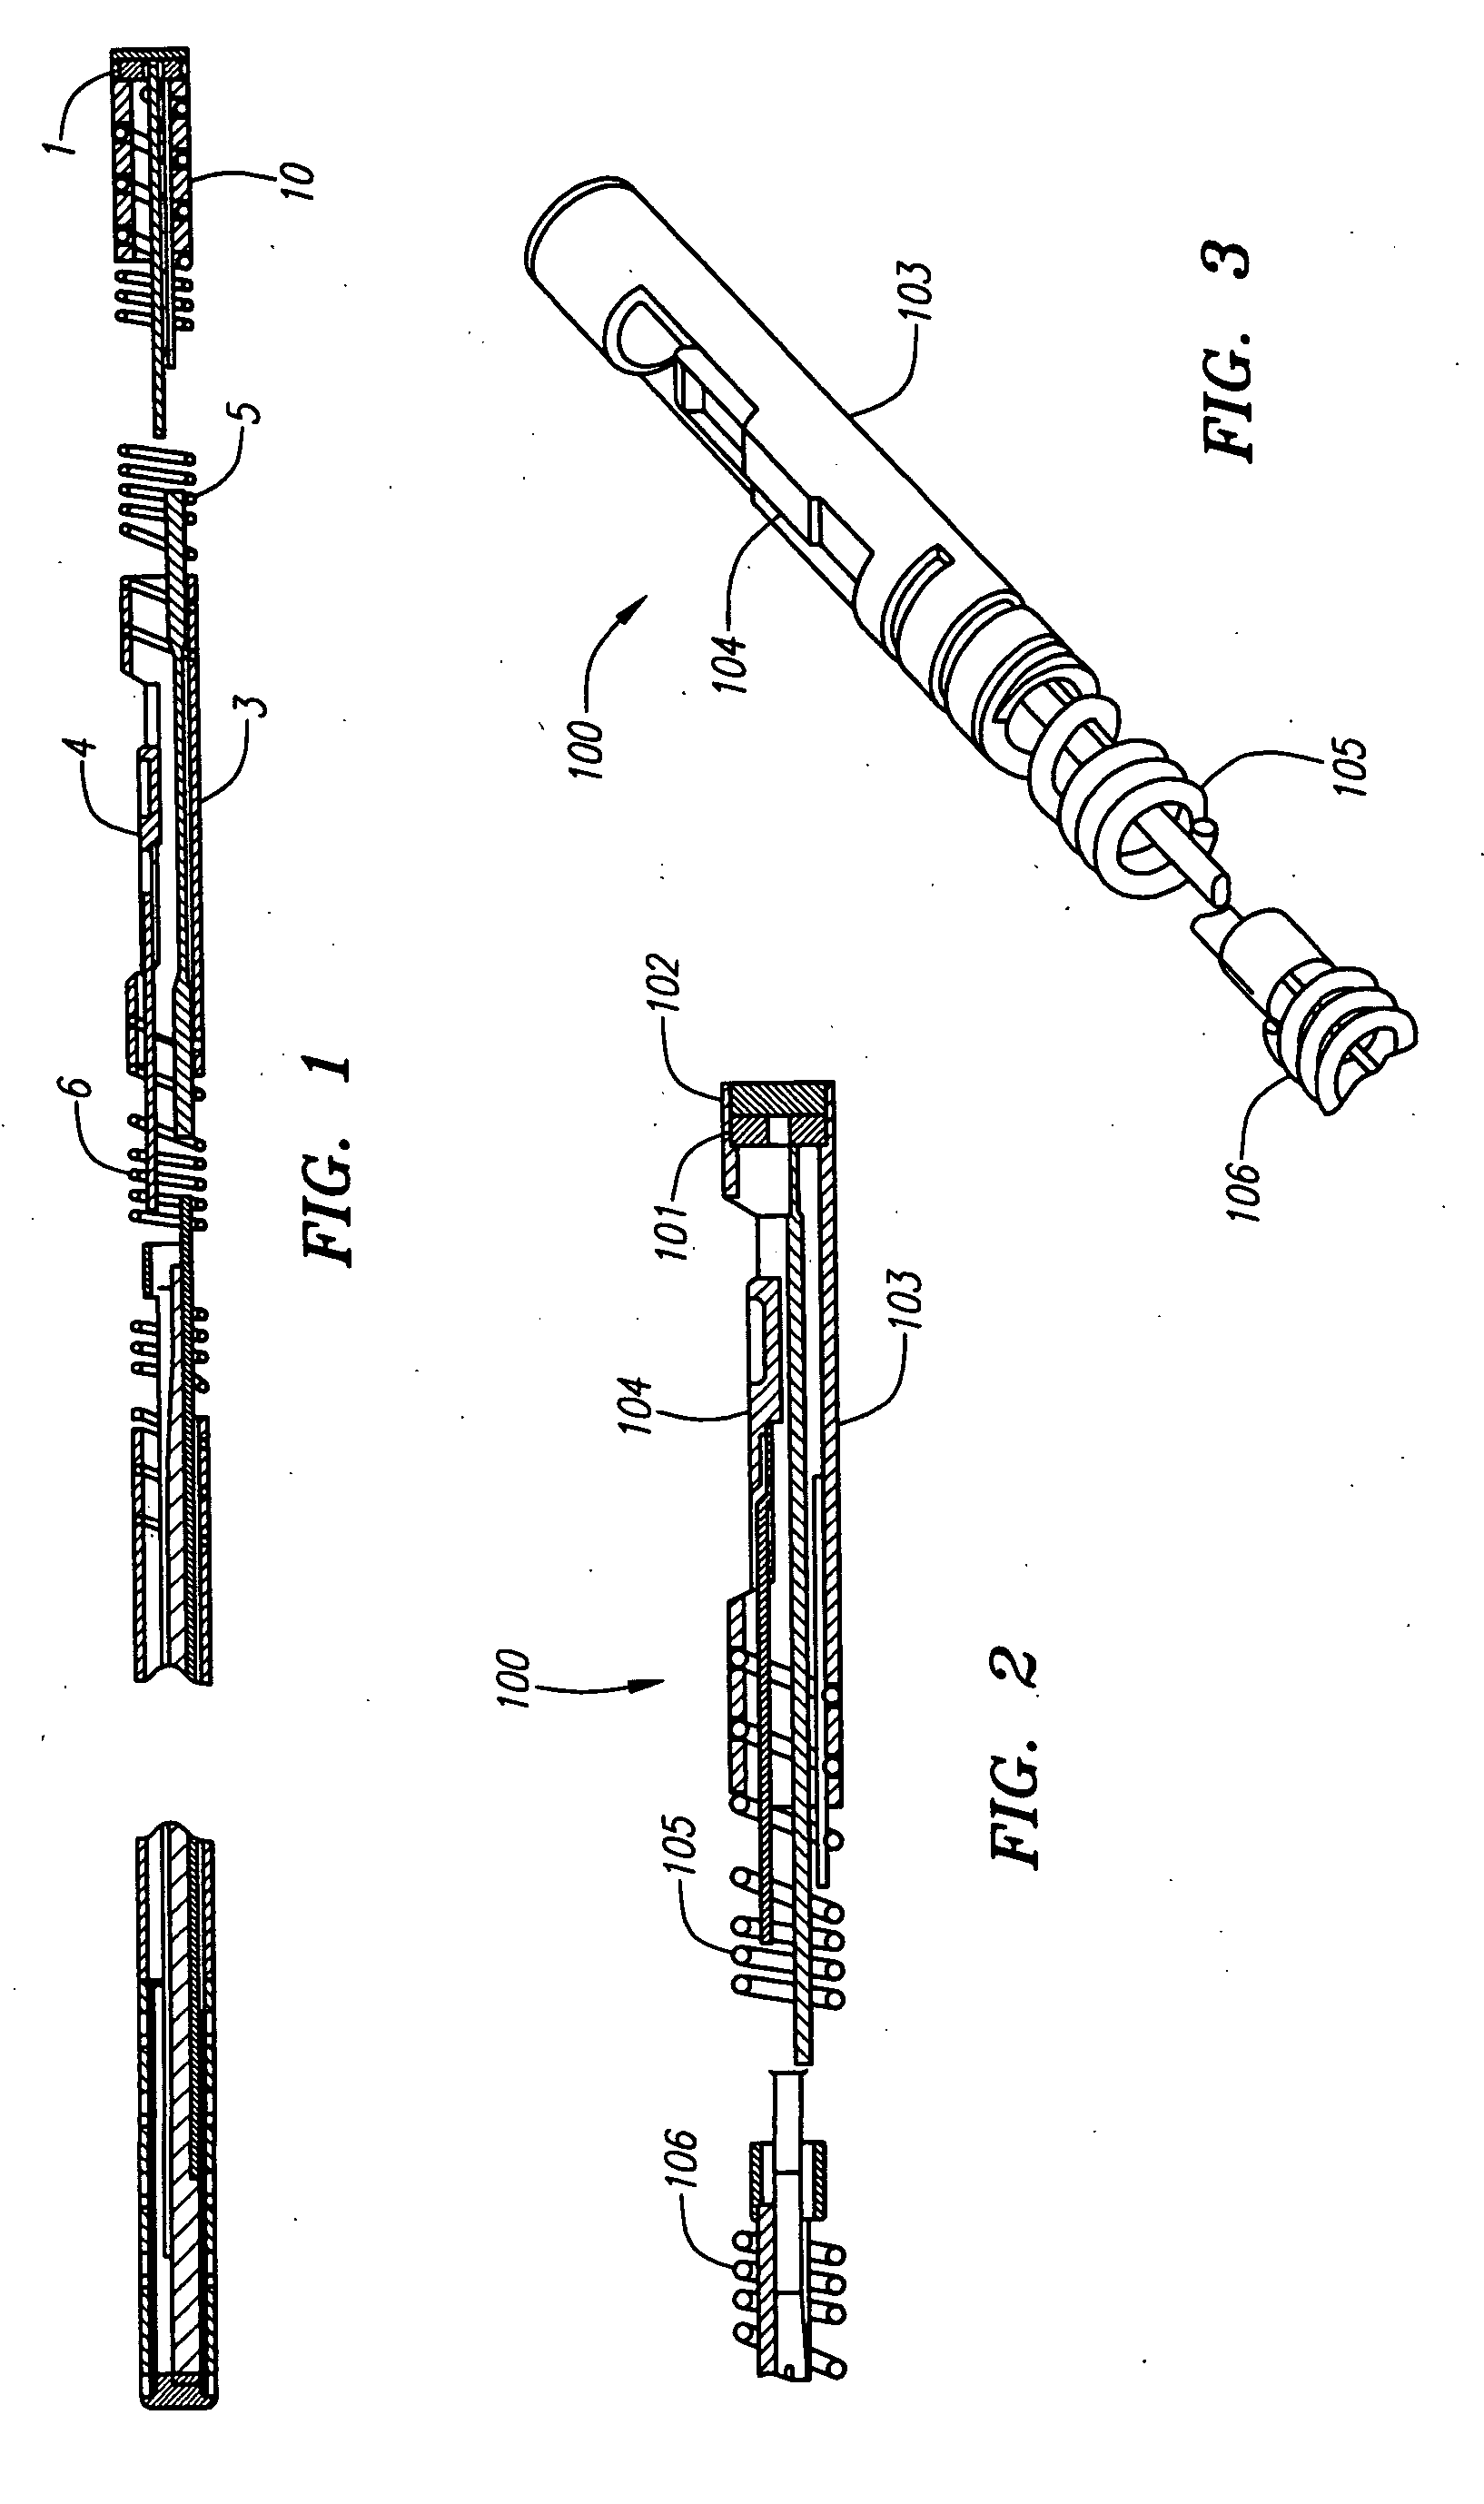 Combination sensor guidewire and methods of use